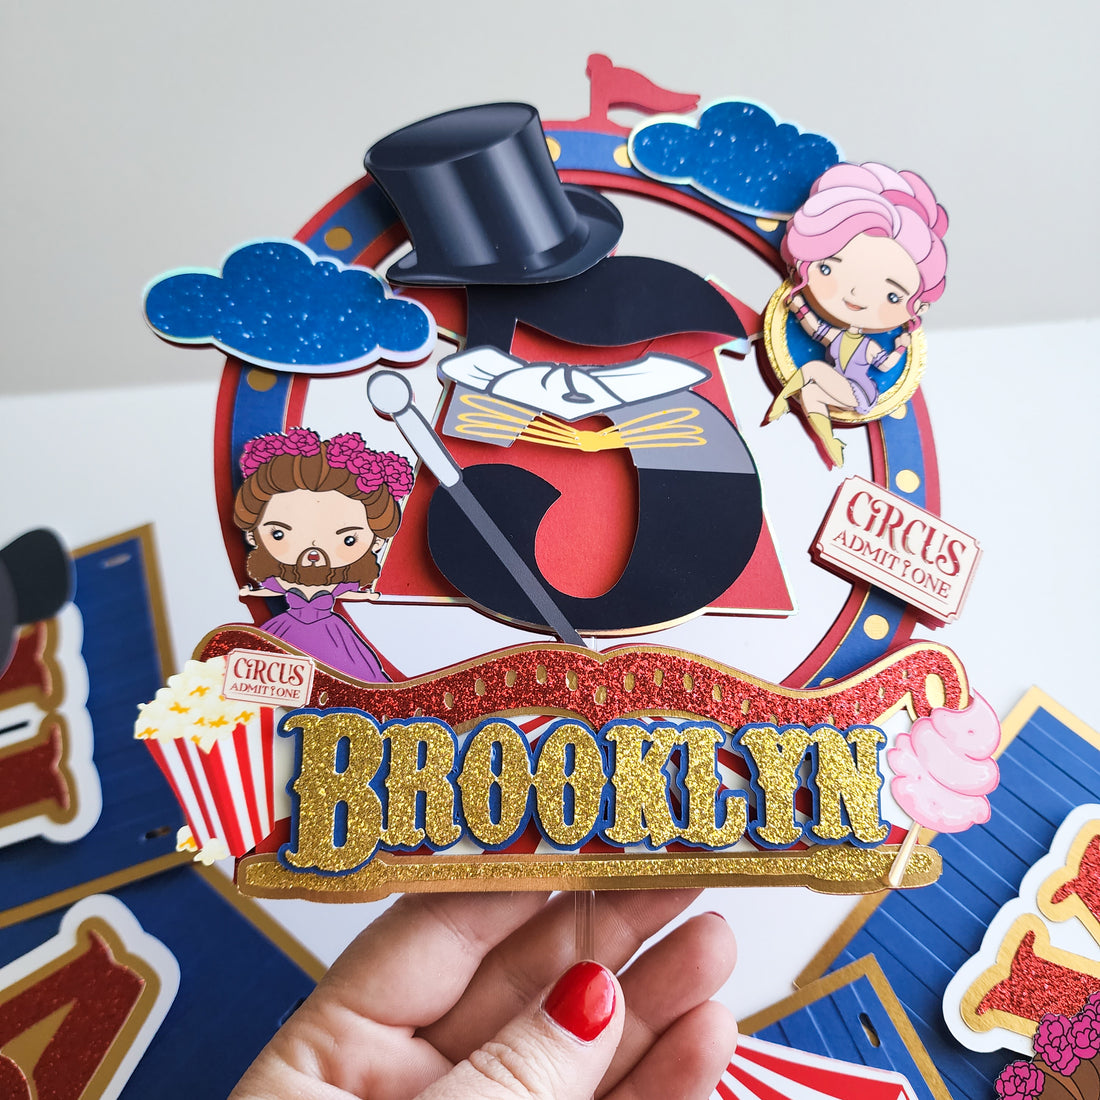 Greatest Showman Cake Topper